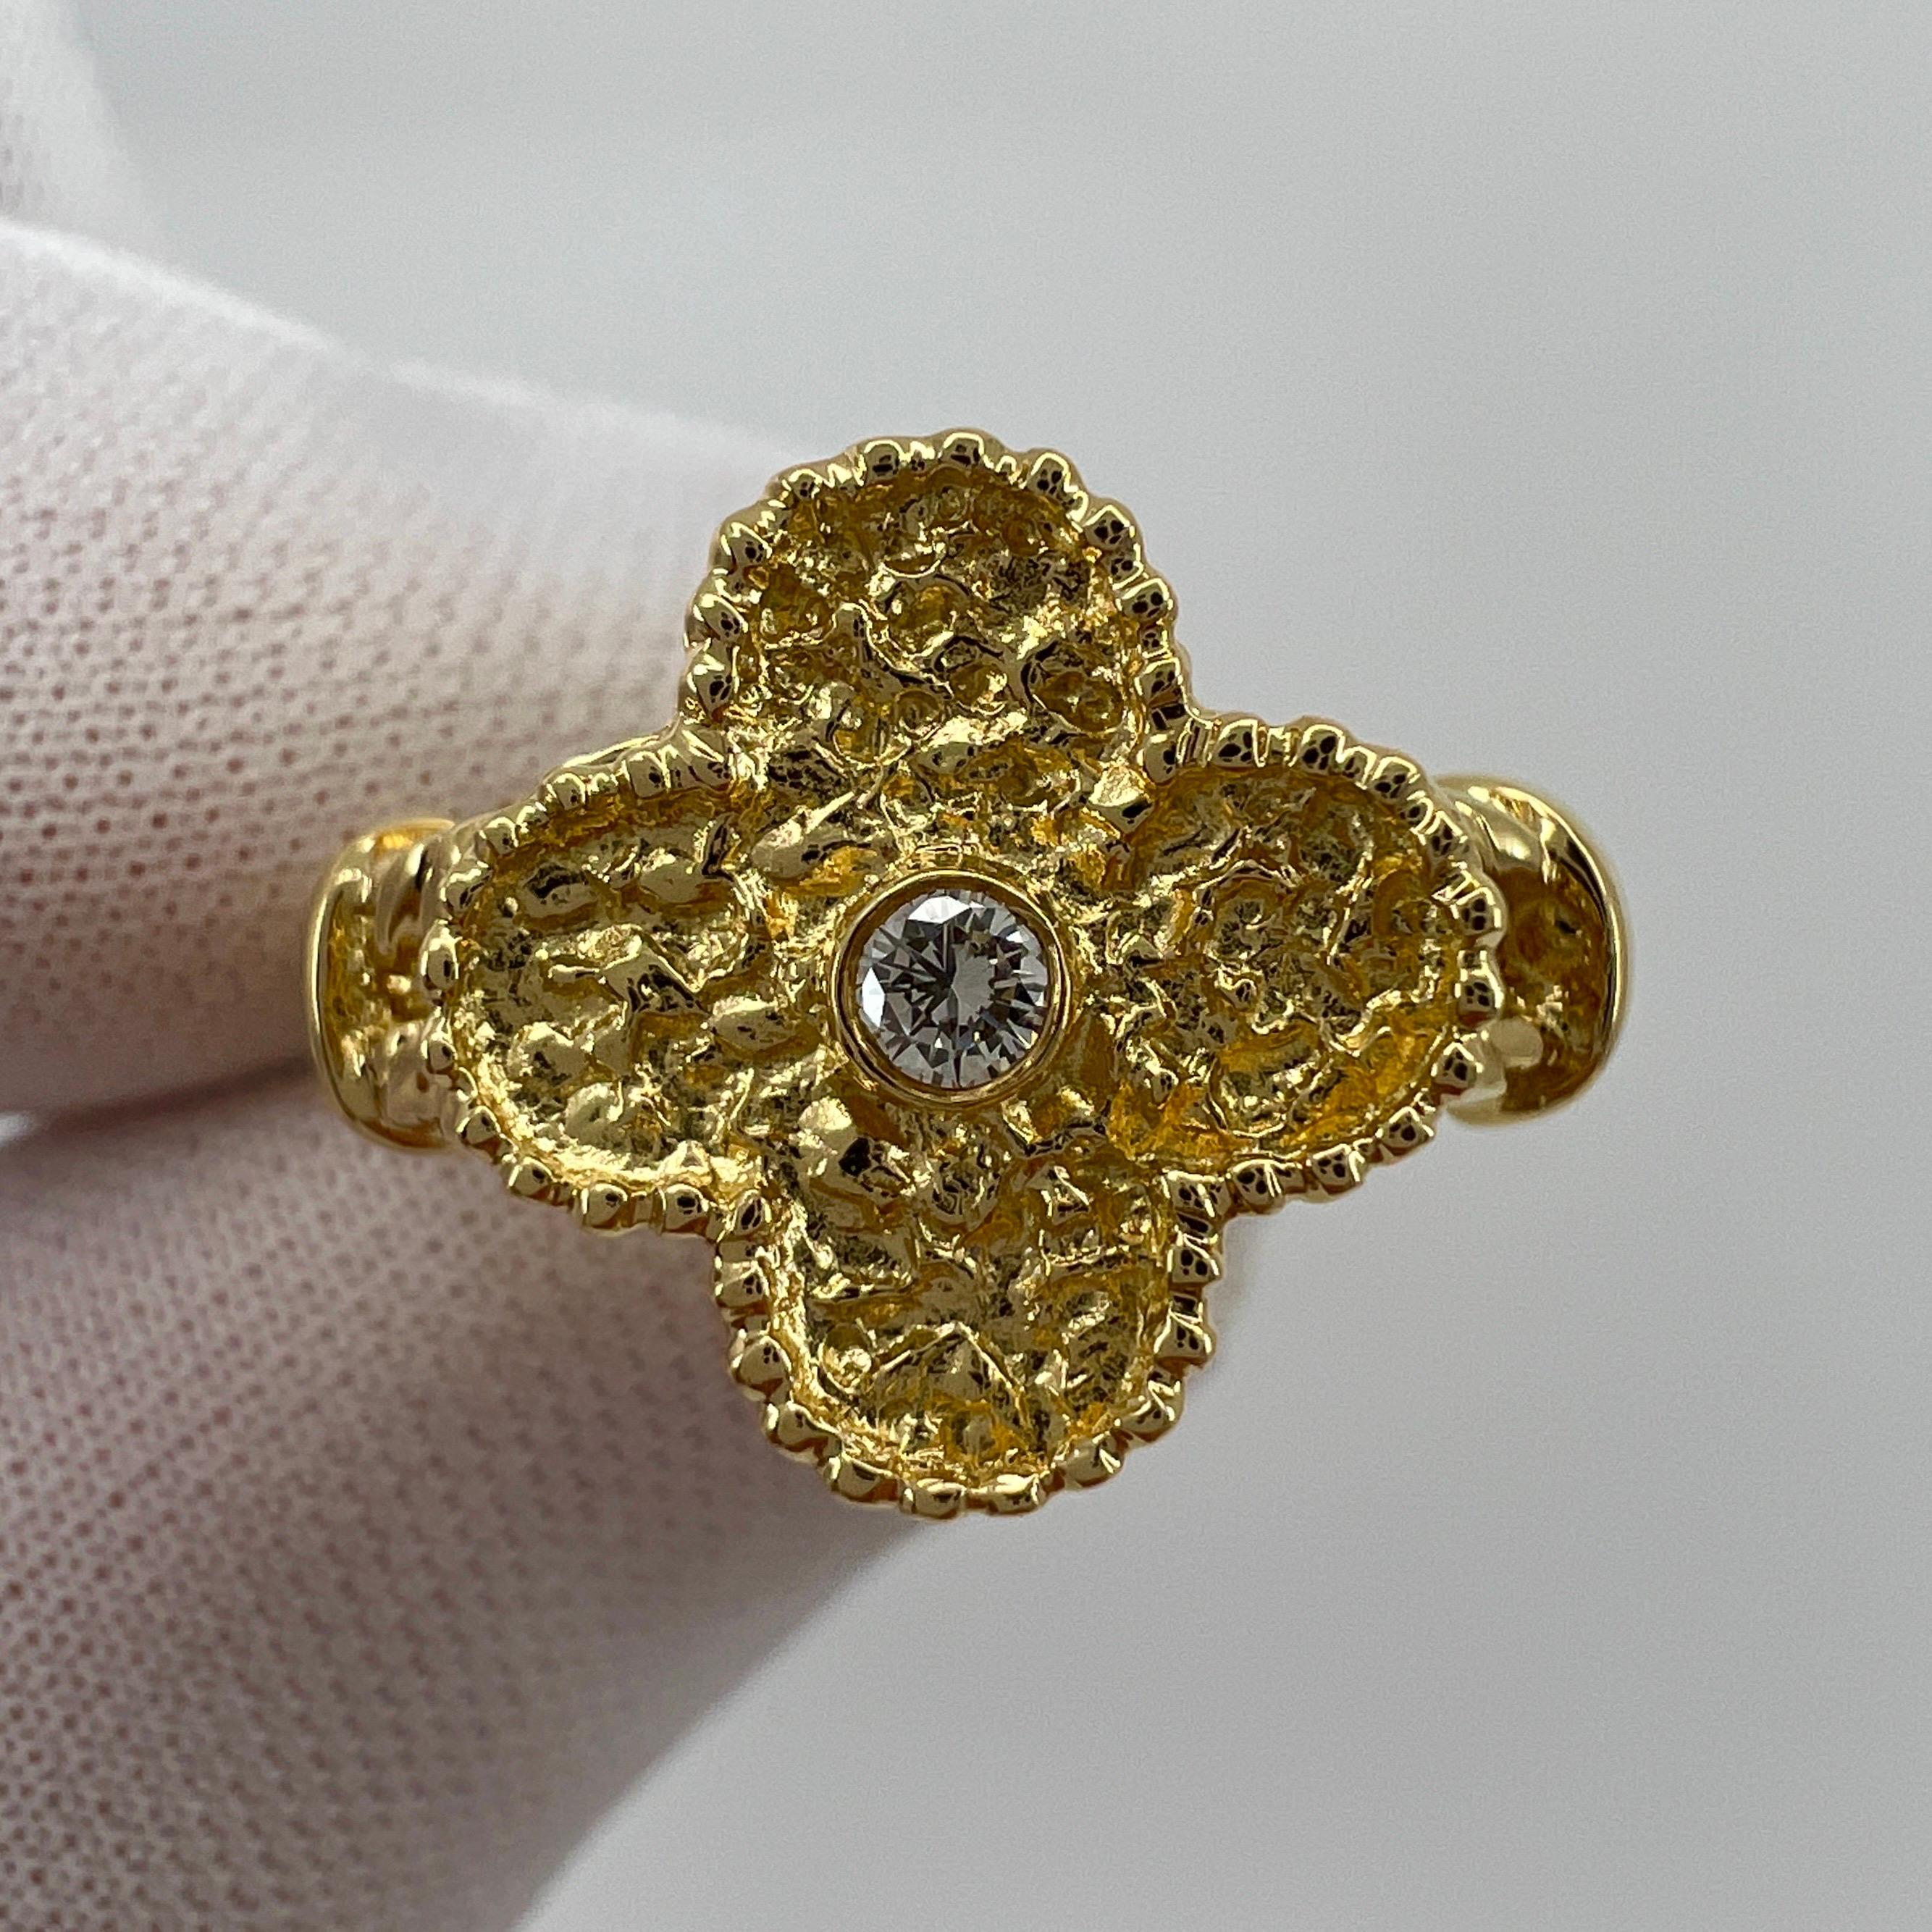 Vintage Van Cleef & Arpels Alhambra Diamond 18 Karat Yellow Gold Ring.

A stunning vintage ring with the classic Alhambra design by fine French jewellery house Van Cleef & Arpels. 
Set with a 0.05ct VVS diamond E/F colour on top of solid textured